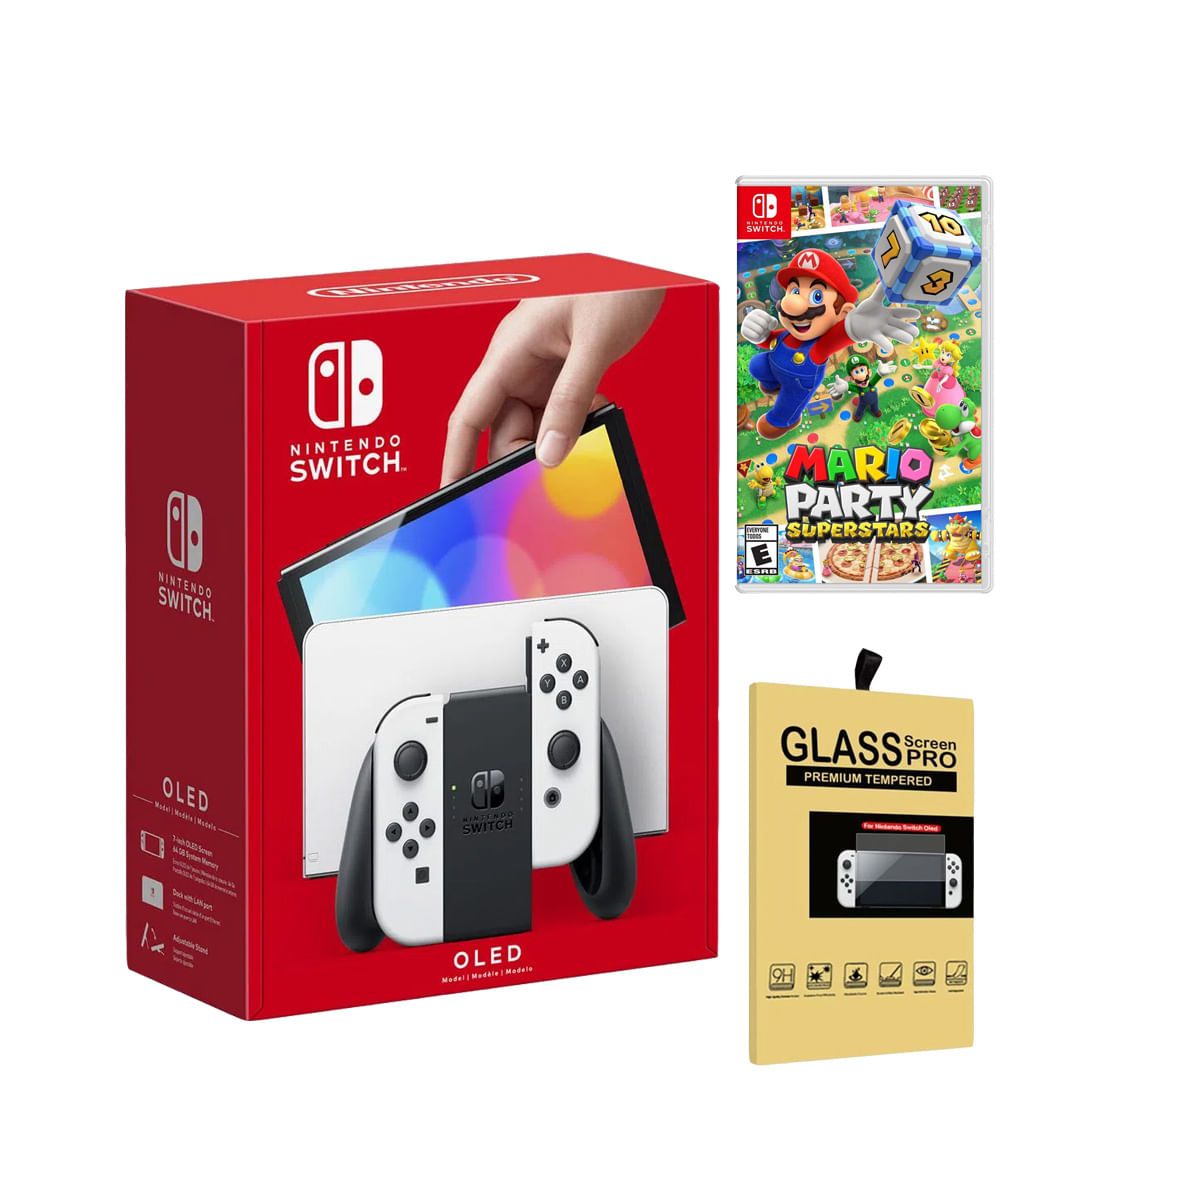 Consola Nintendo Switch Oled Blanca + Mario Party Superstars + Mica